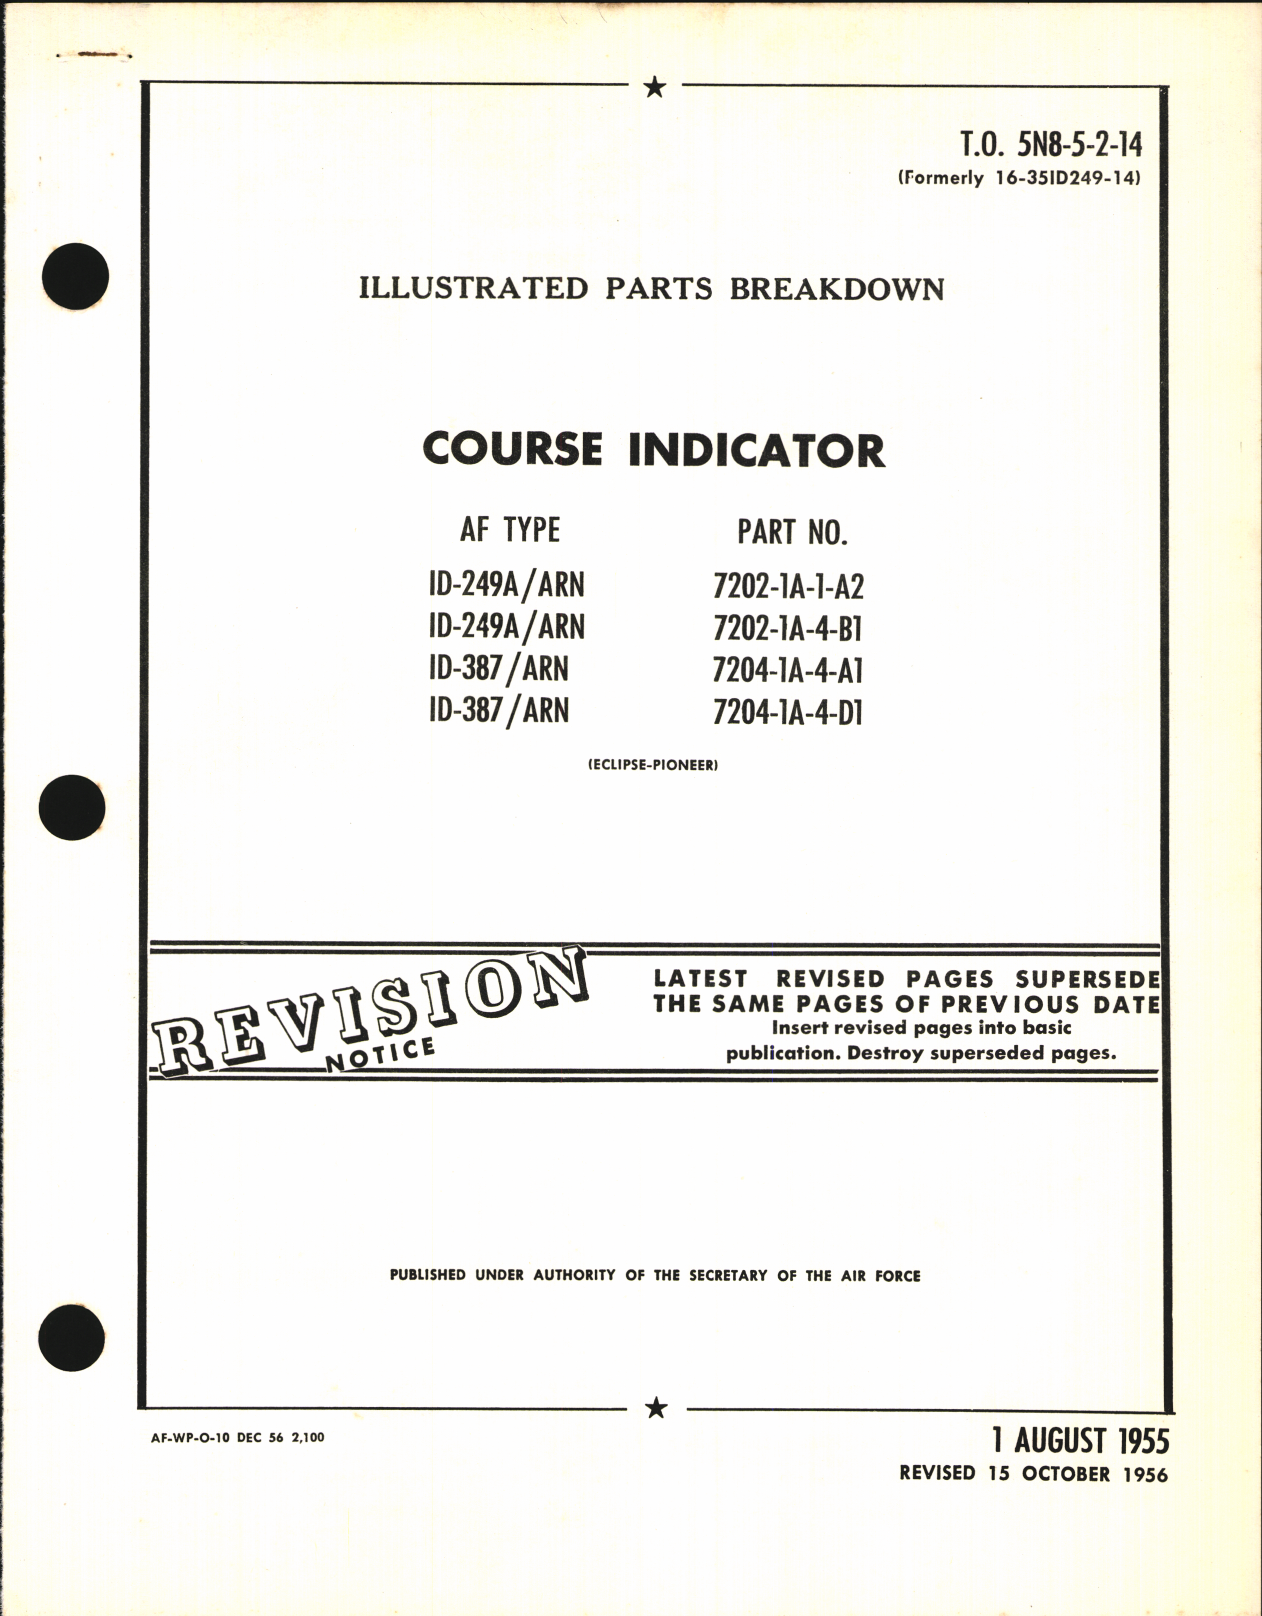 Sample page 1 from AirCorps Library document: Illustrated Parts Breakdown for Course Indicators